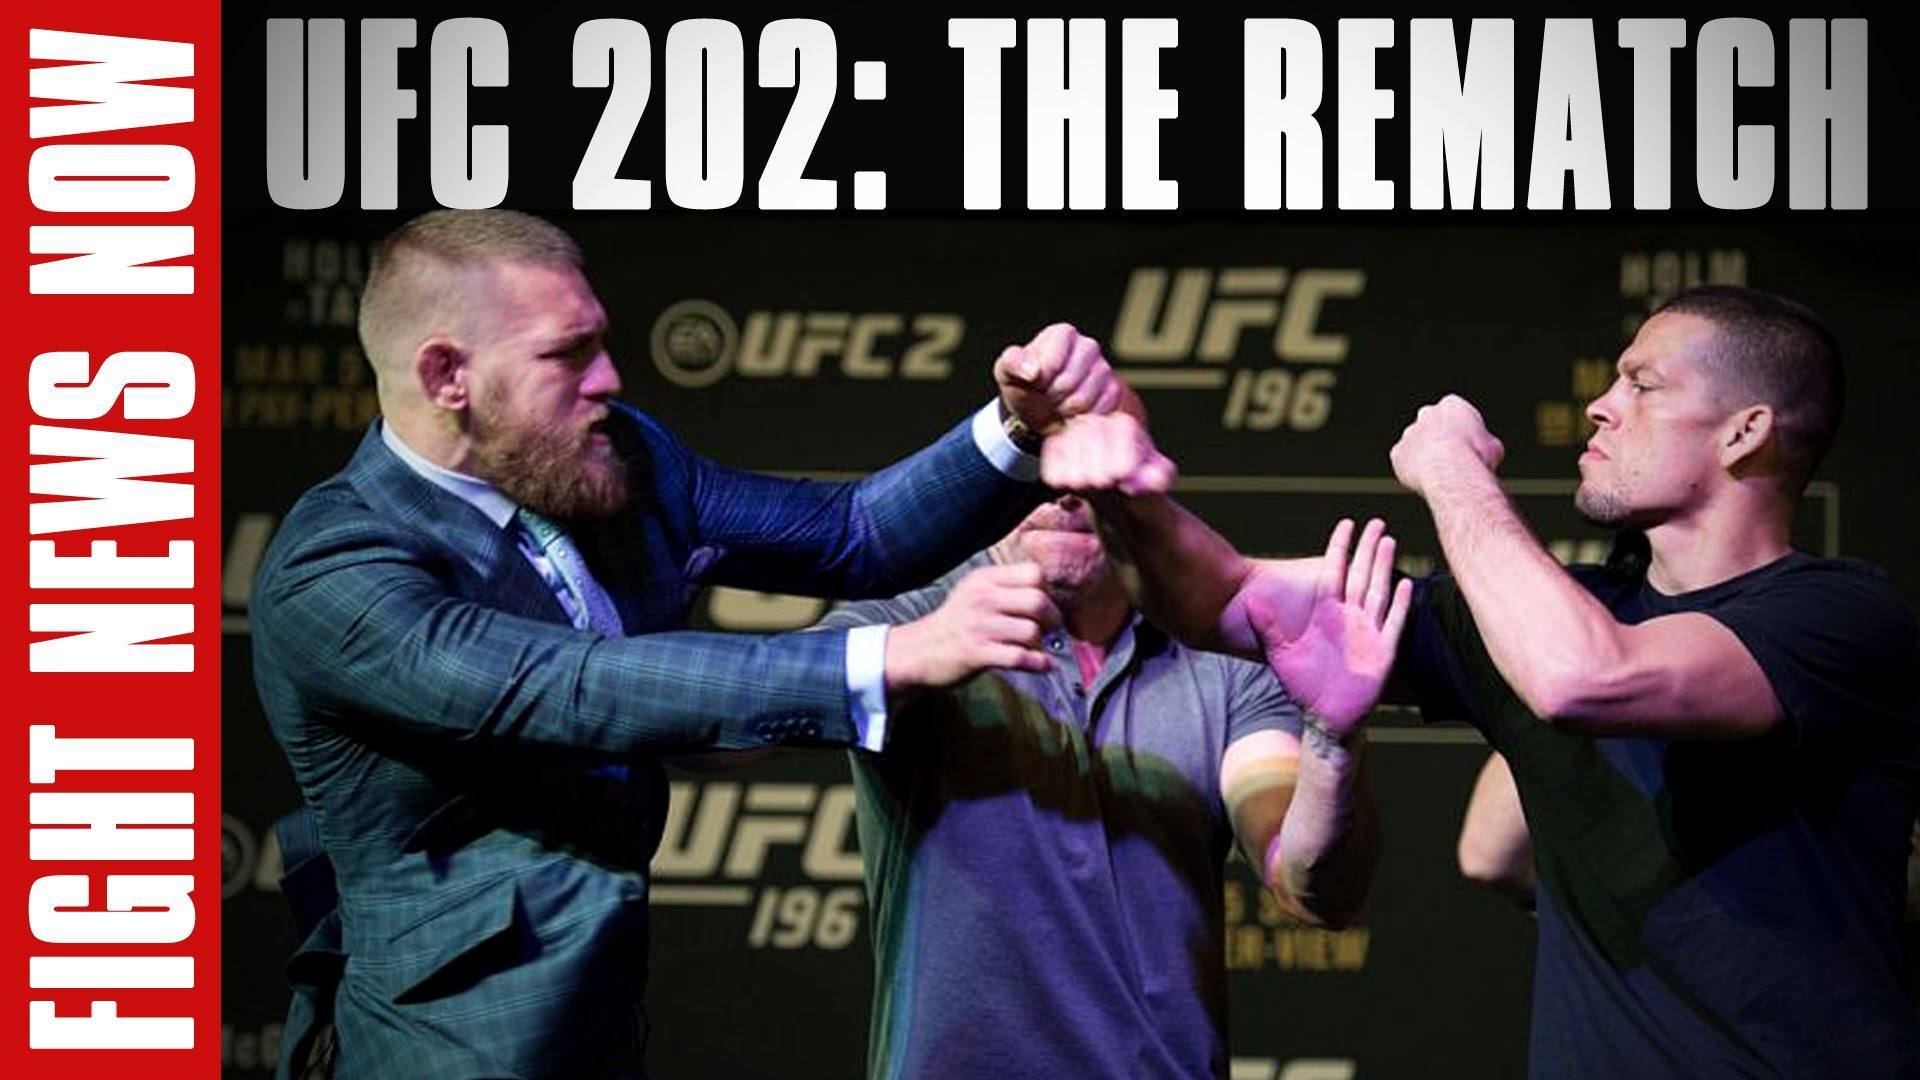 UFC-202-Nate-Diaz-vs.-Conor-McGregor-Rematch-Ariel-Helwanis-Ban-Lifted-by-UFC-on-Fight-News-Now